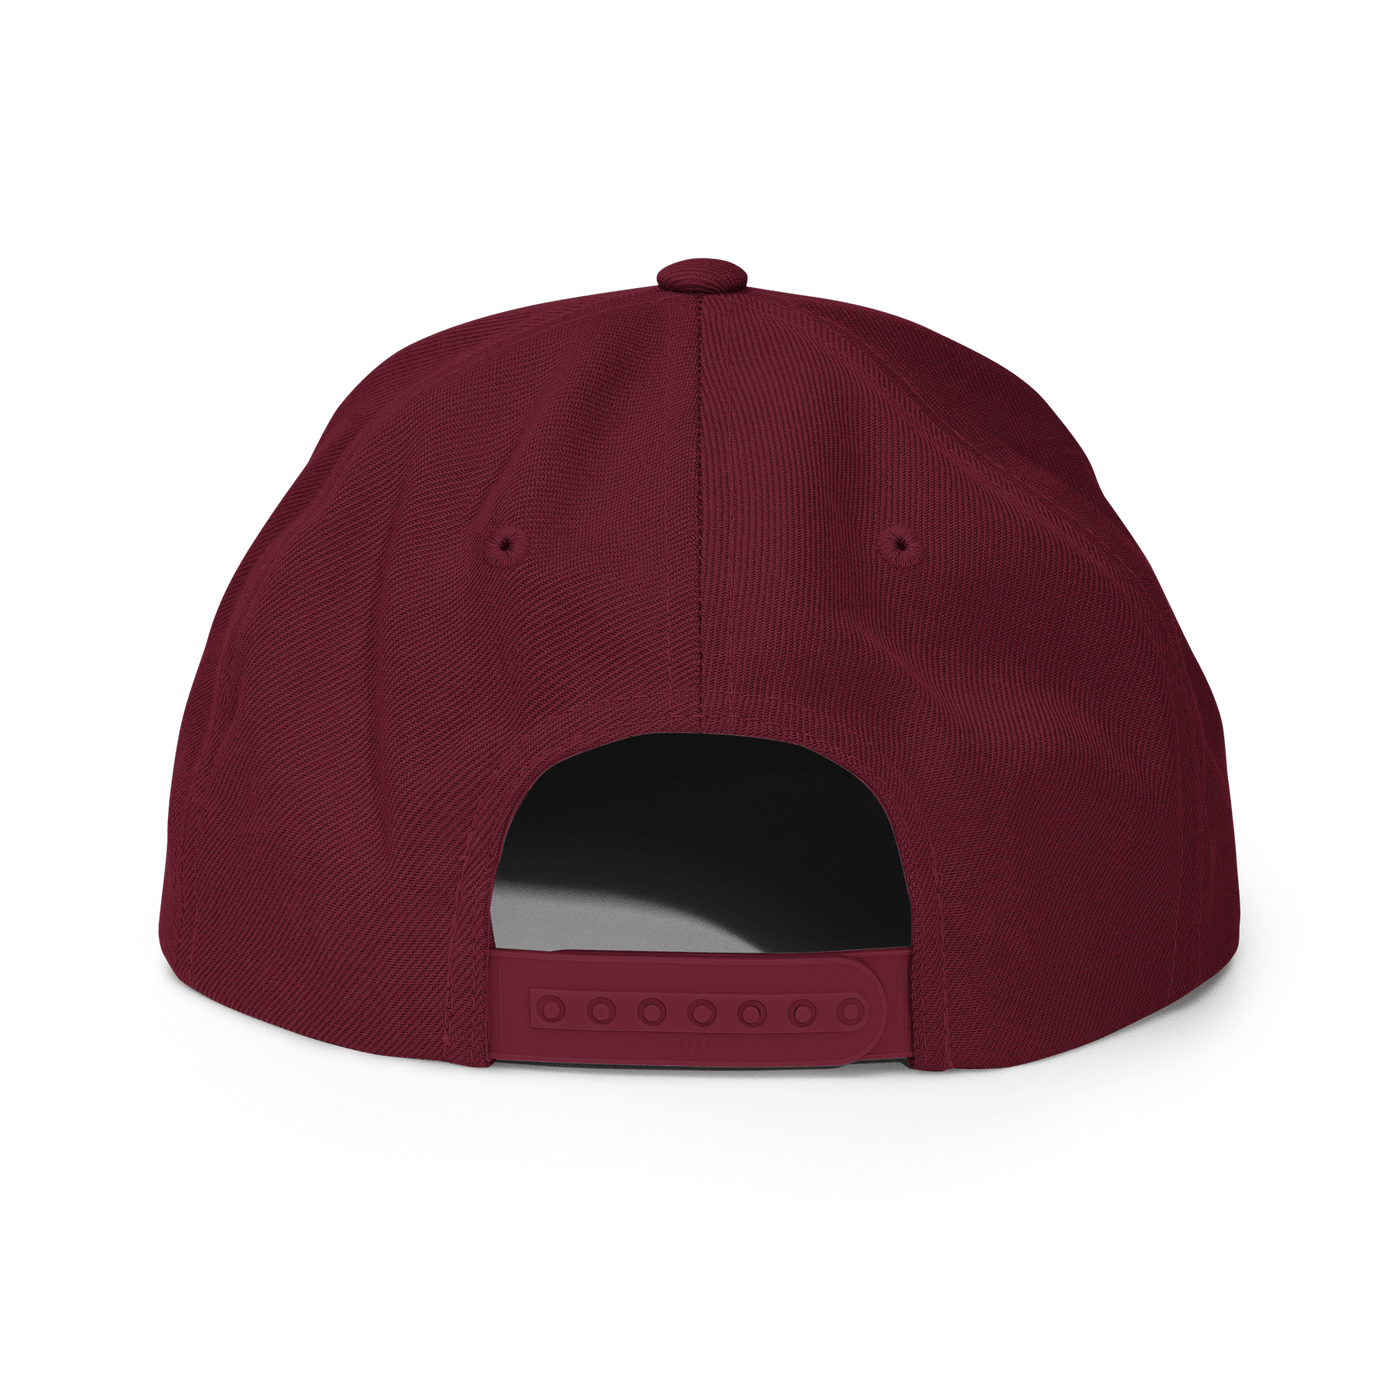 Fish & Chips Snapback Hat - Maroon - - Just Another Cap Store